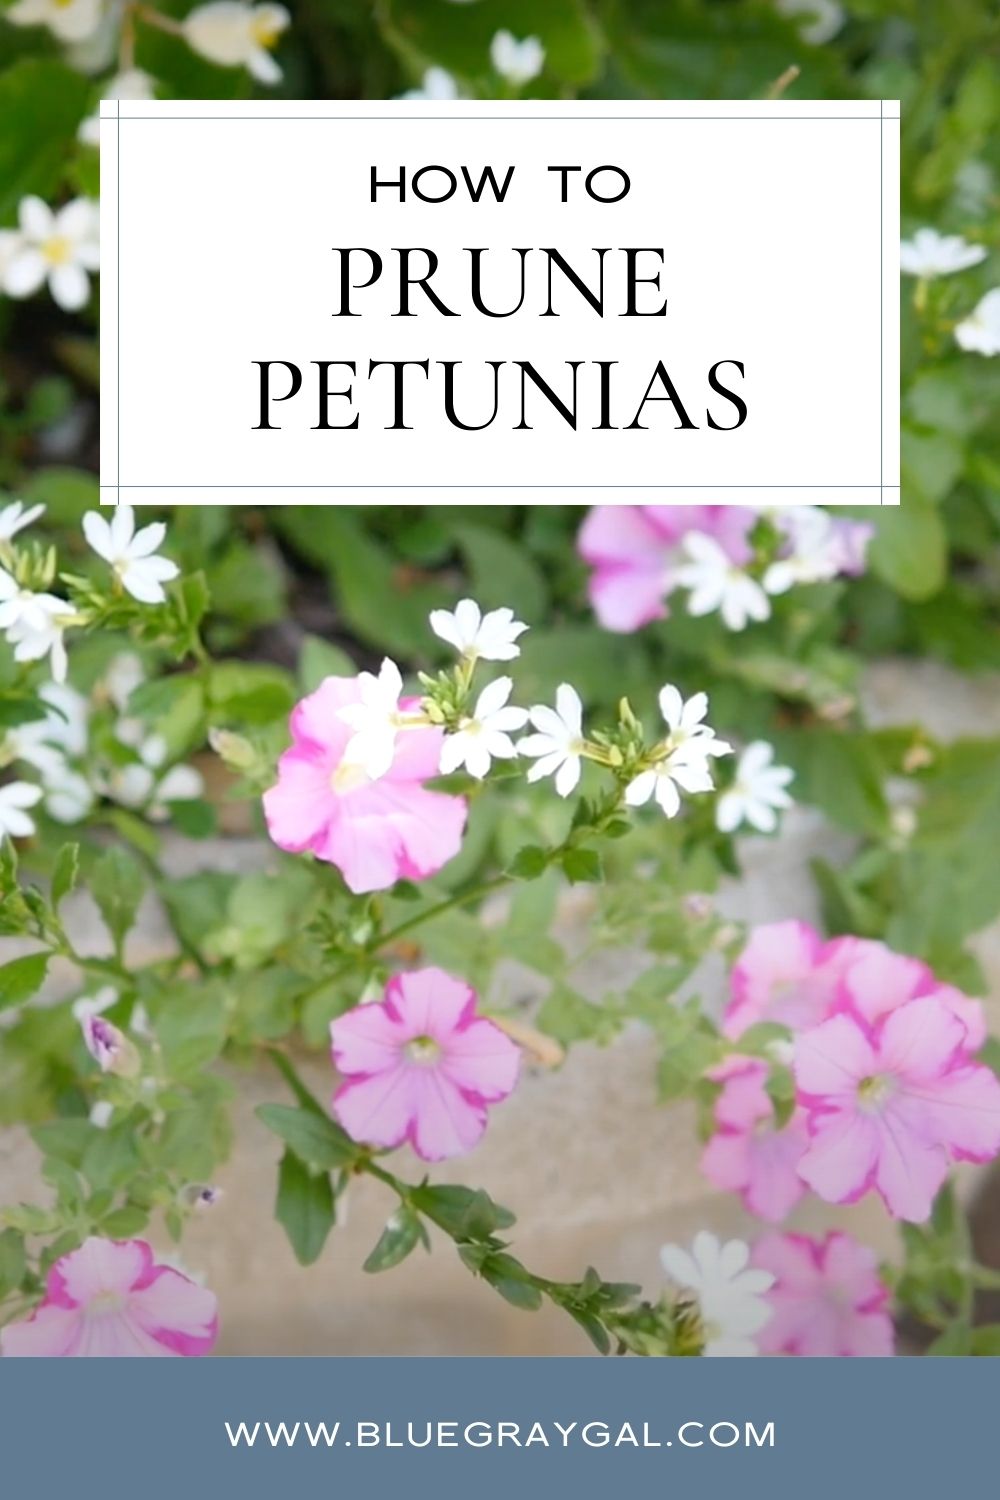 Summer petunias wilting? Here are easy tips to show you how to properly prune petunias to keep your container gardens or summer flowers blooming!